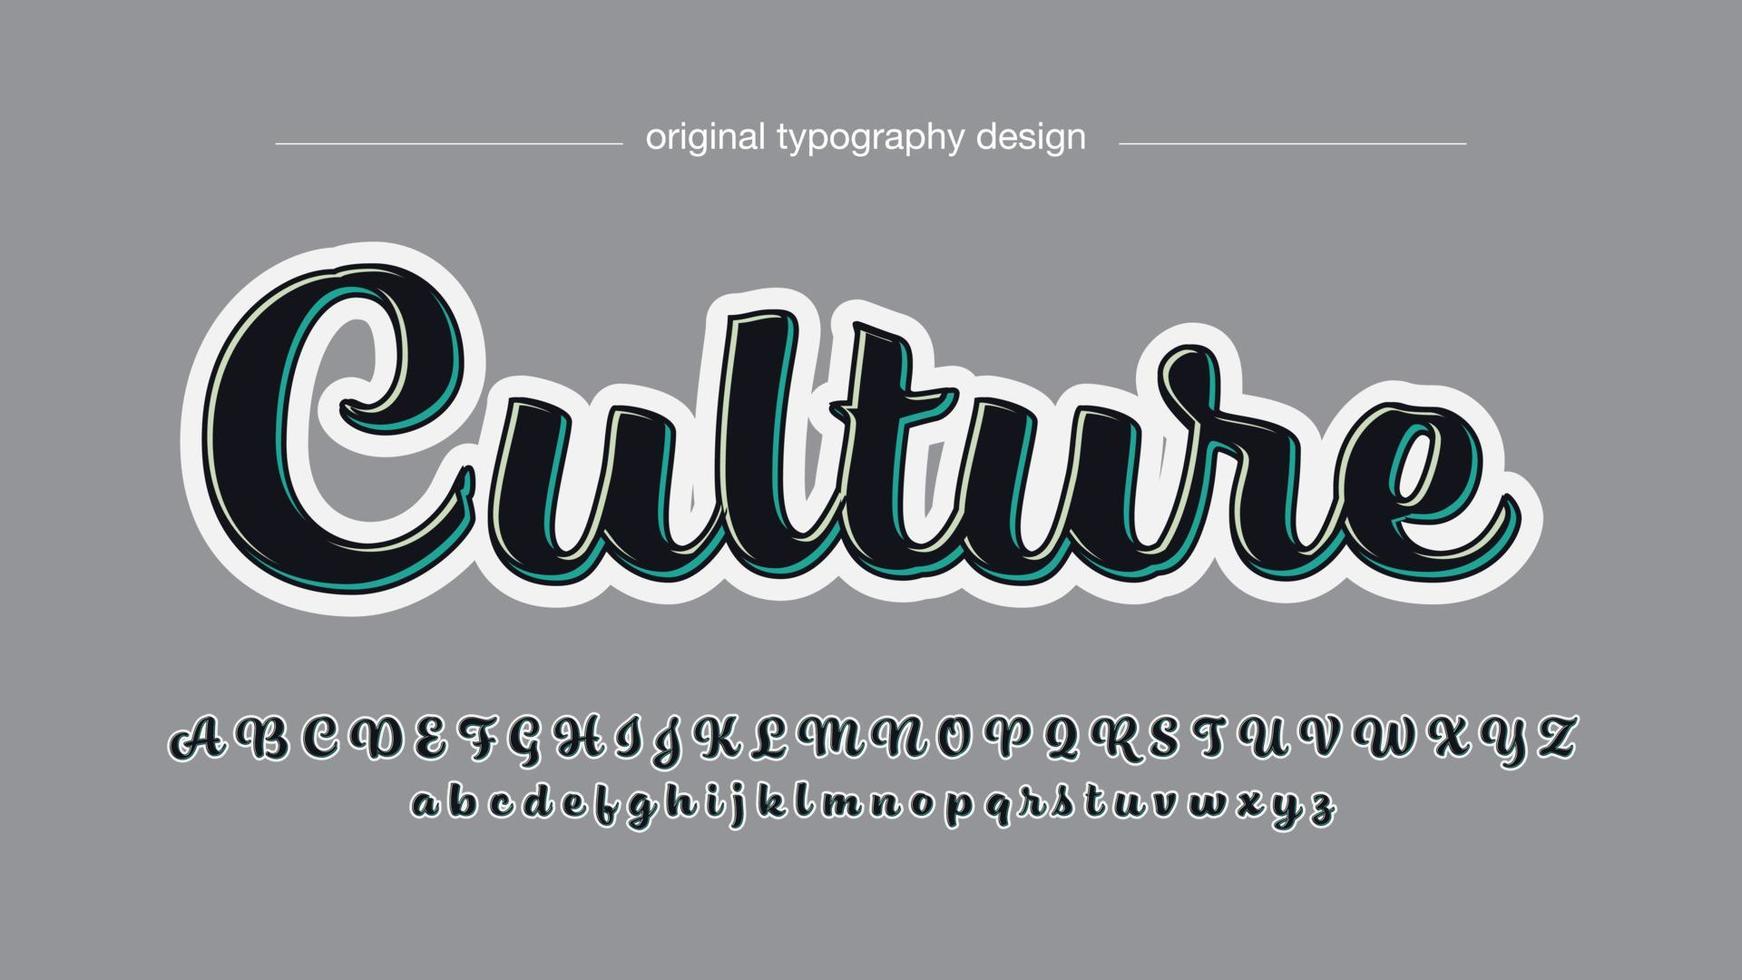 black and white 3d cursive artistic typography font vector